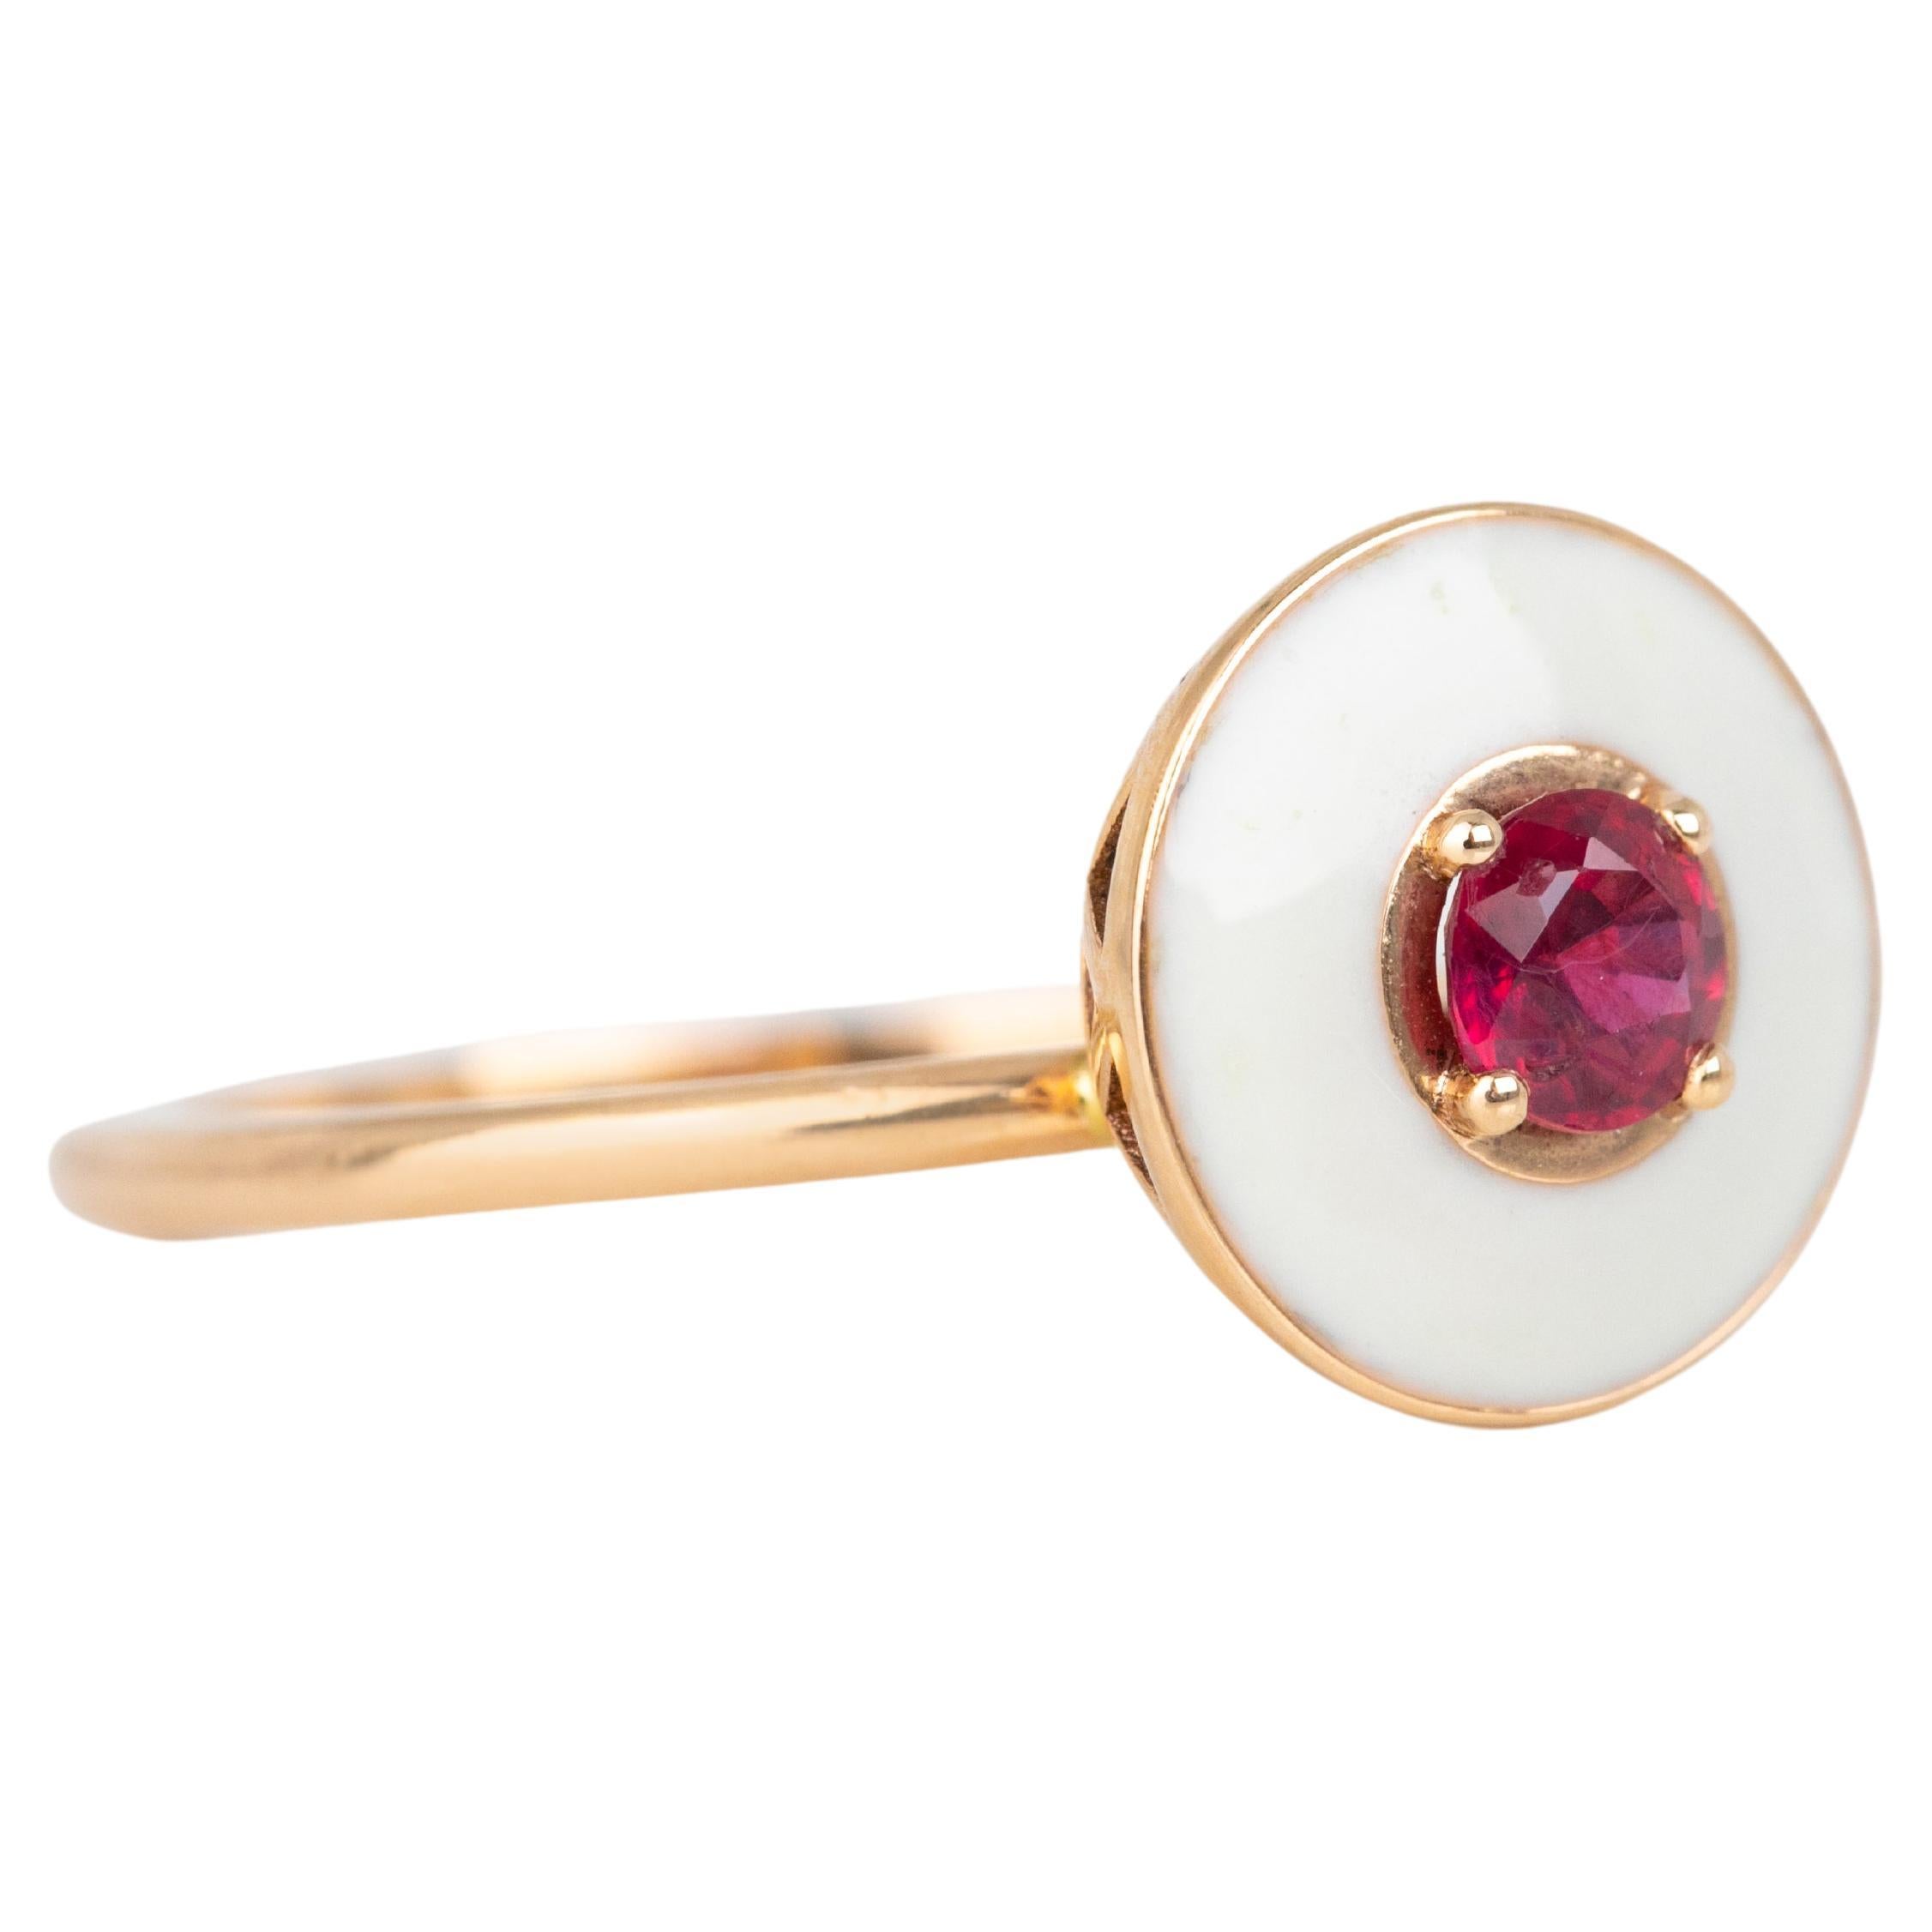 For Sale:  14k Gold Art Deco Stlye Enameled 0.30 Ct Ruby Cocktail Ring 2